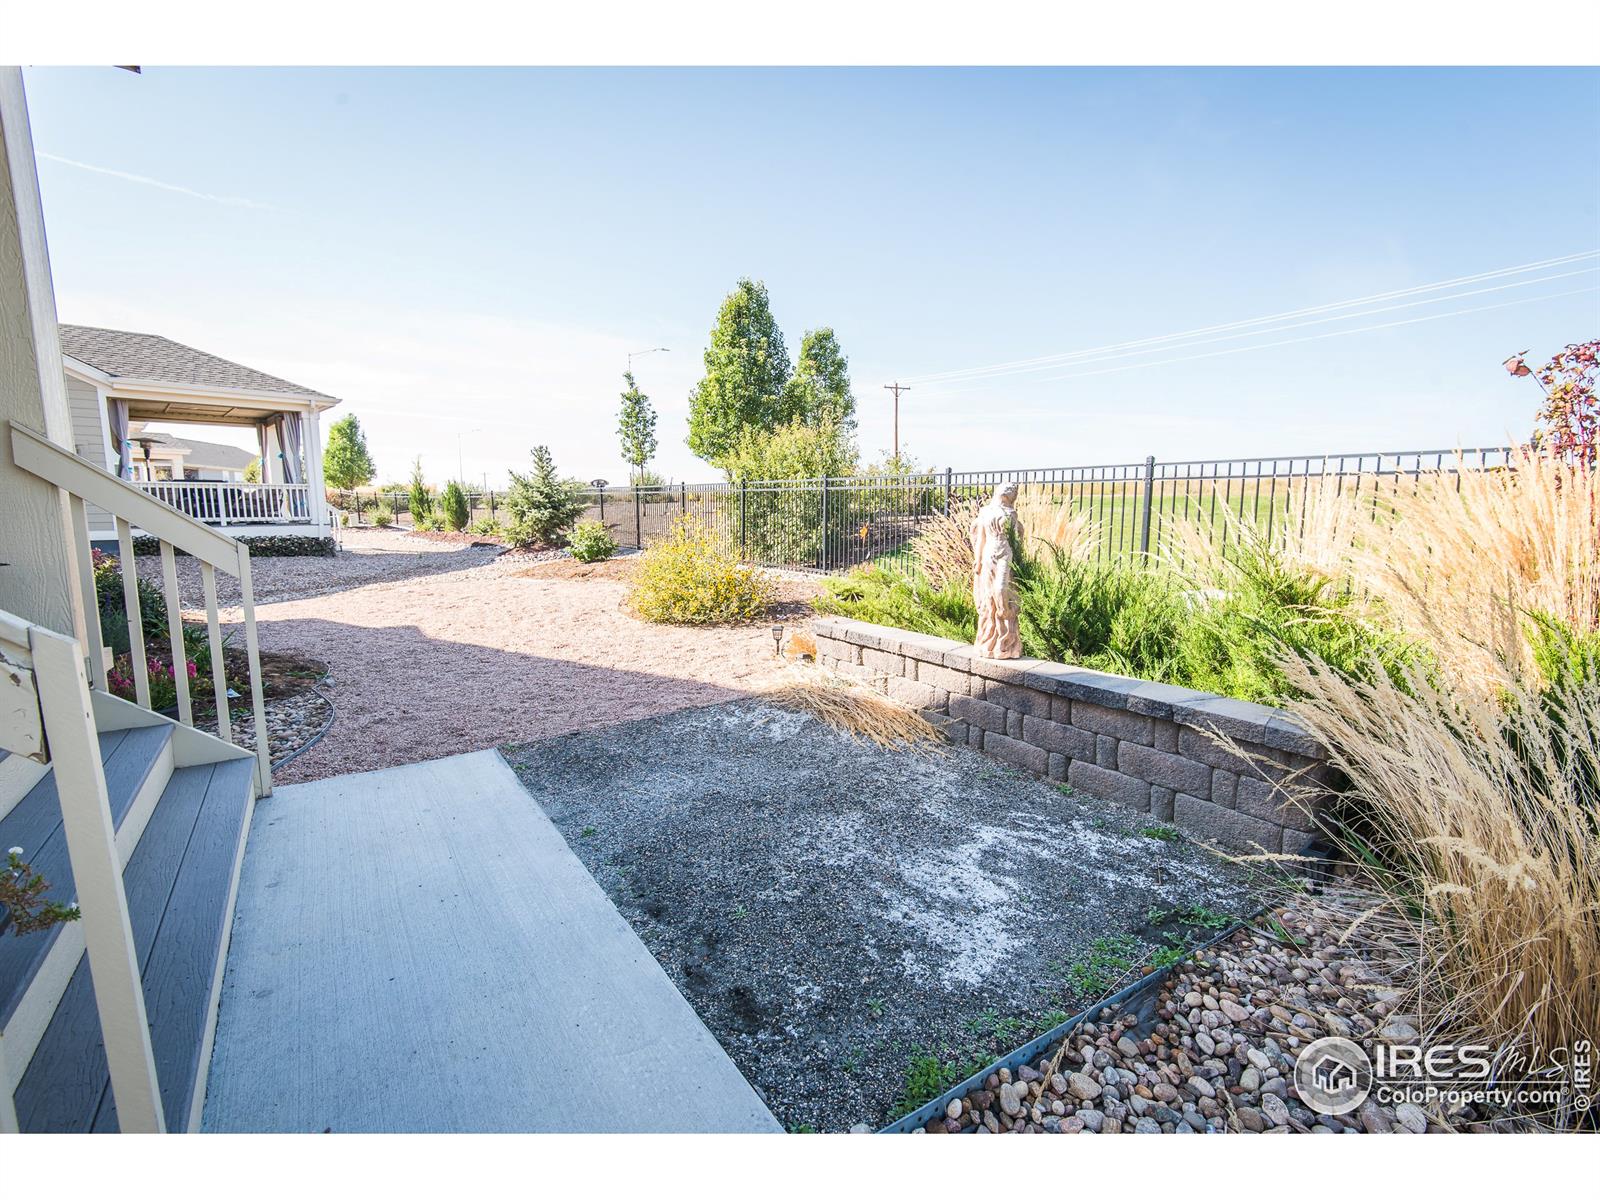 15333 Quince, Thornton, CO